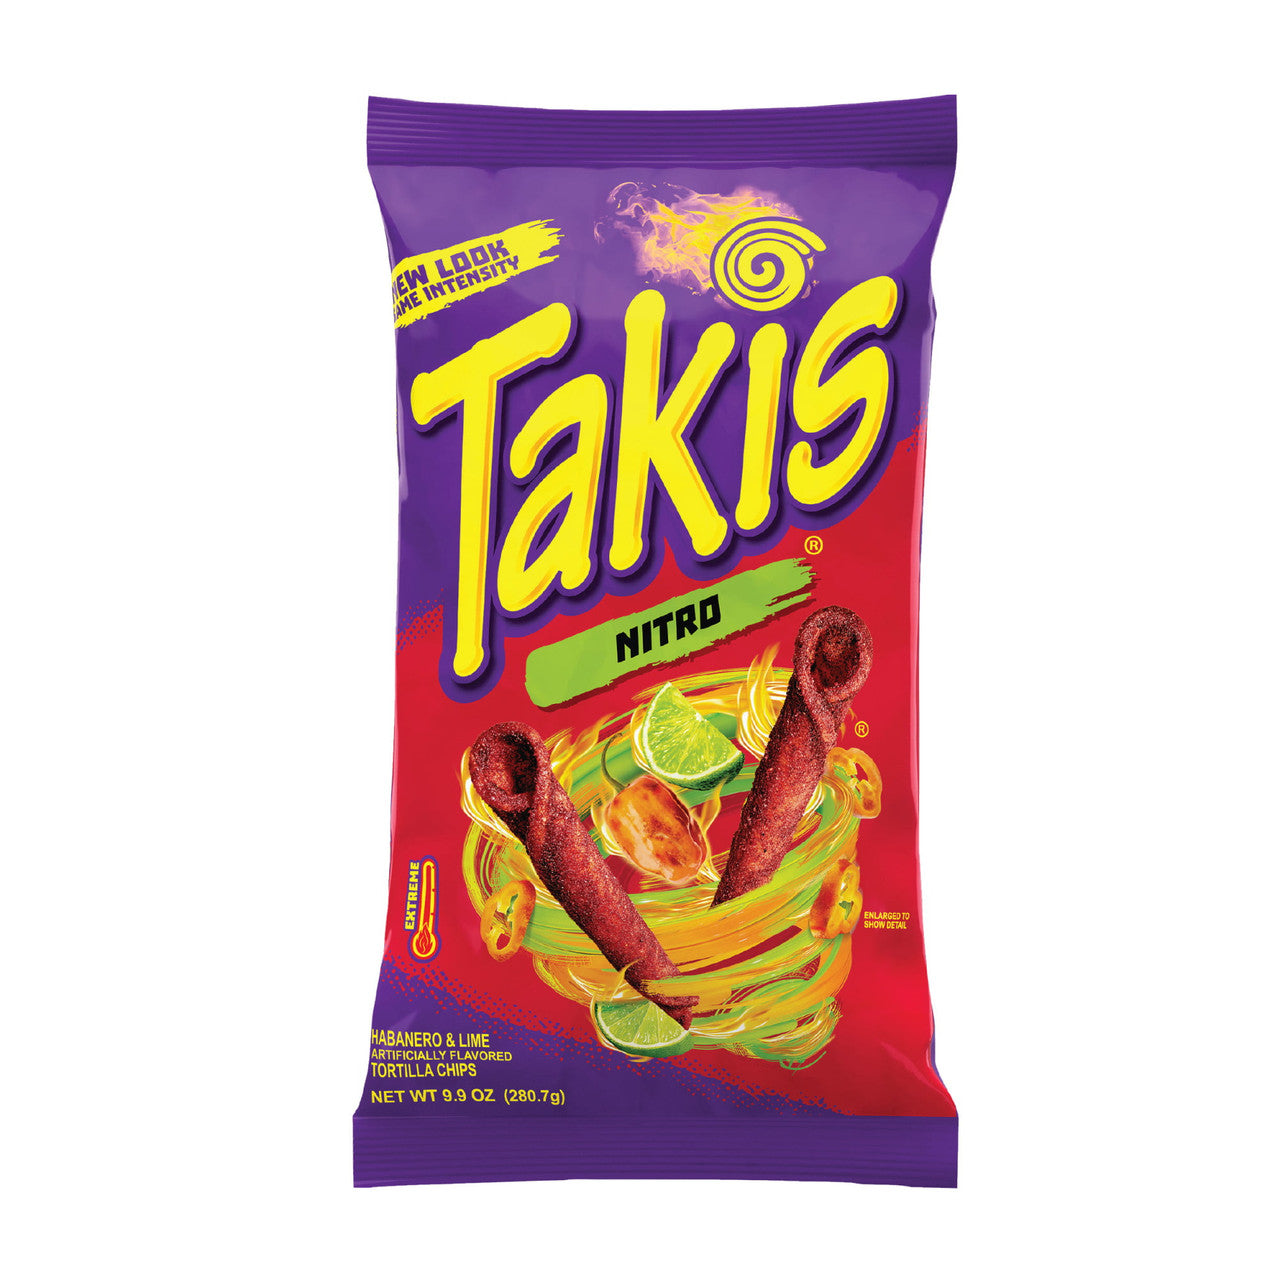 Takis Rolled Tortilla Chips, Nitro Flavor, 280g/9.9 oz. {Imported from Canada}